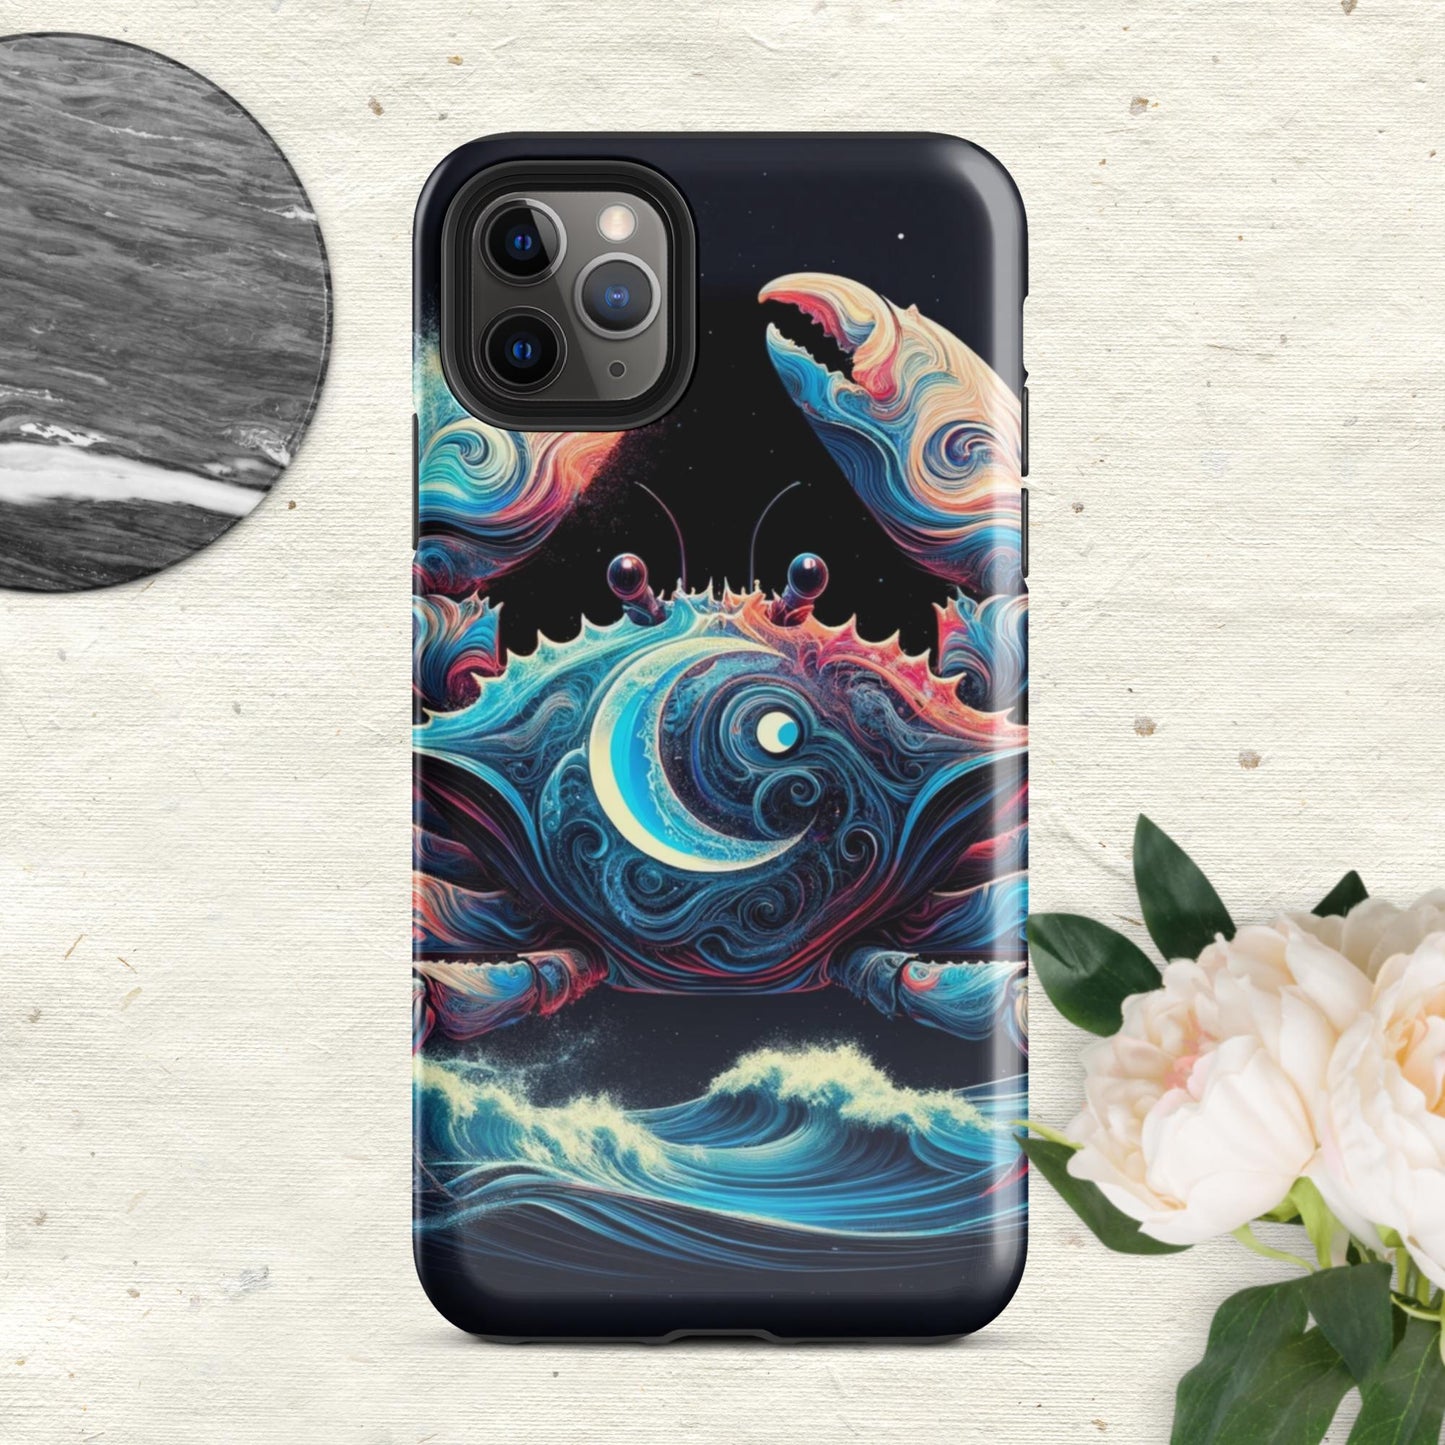 The Hologram Hook Up Glossy / iPhone 11 Pro Max Cancer Tough Case for iPhone®